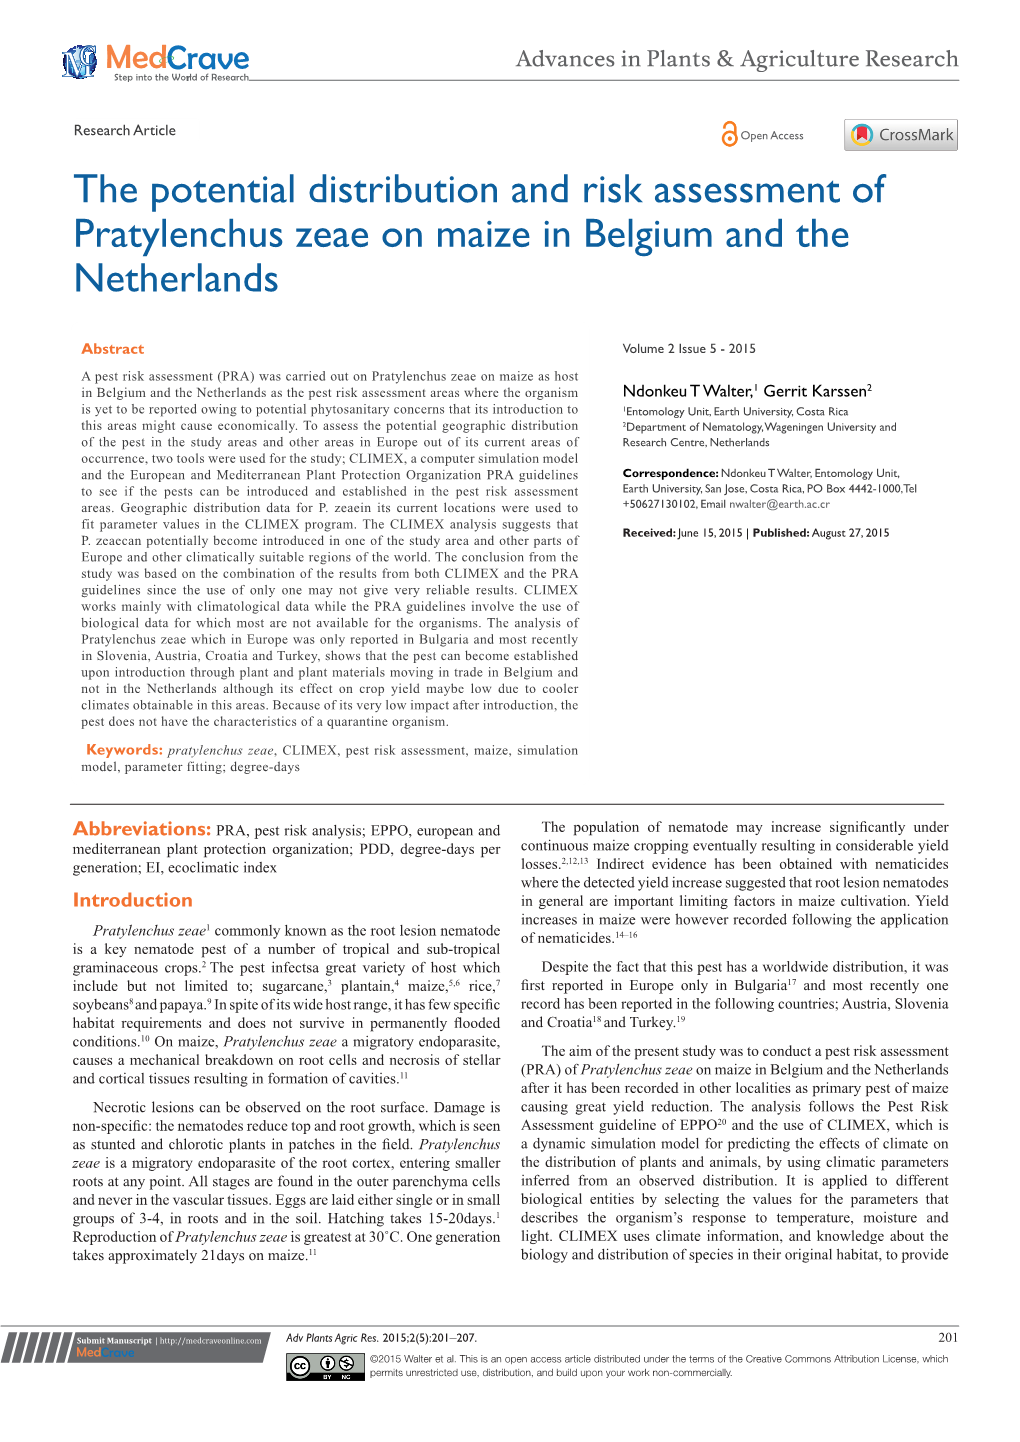 The Potential Distribution and Risk Assessment of Pratylenchus Zeae on Maize in Belgium and the Netherlands